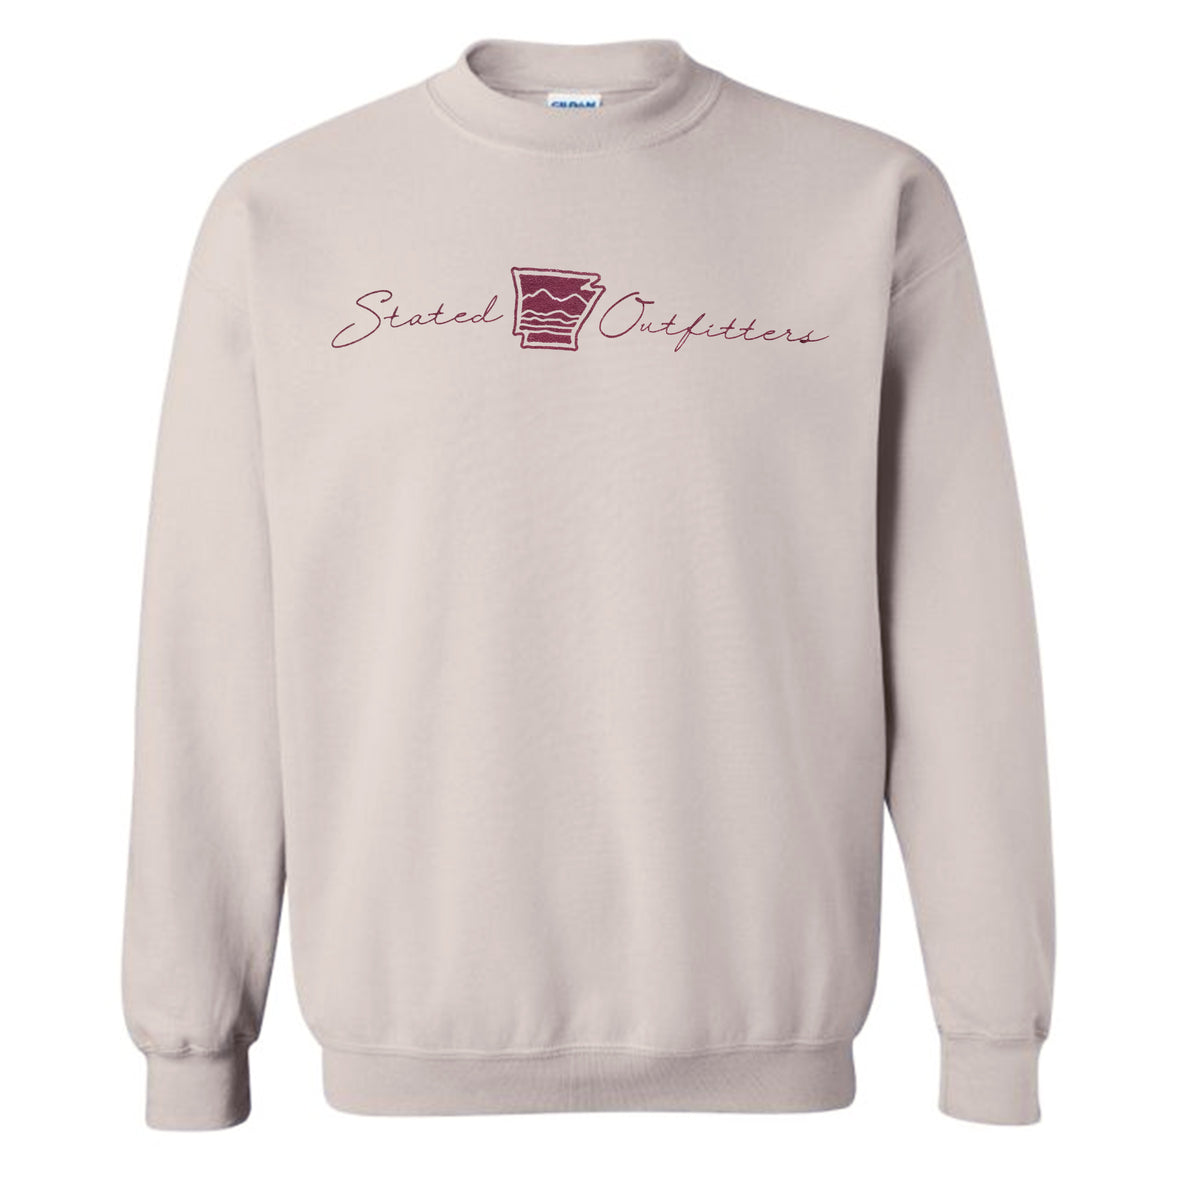 Stated Outfitters Linear Sweatshirt